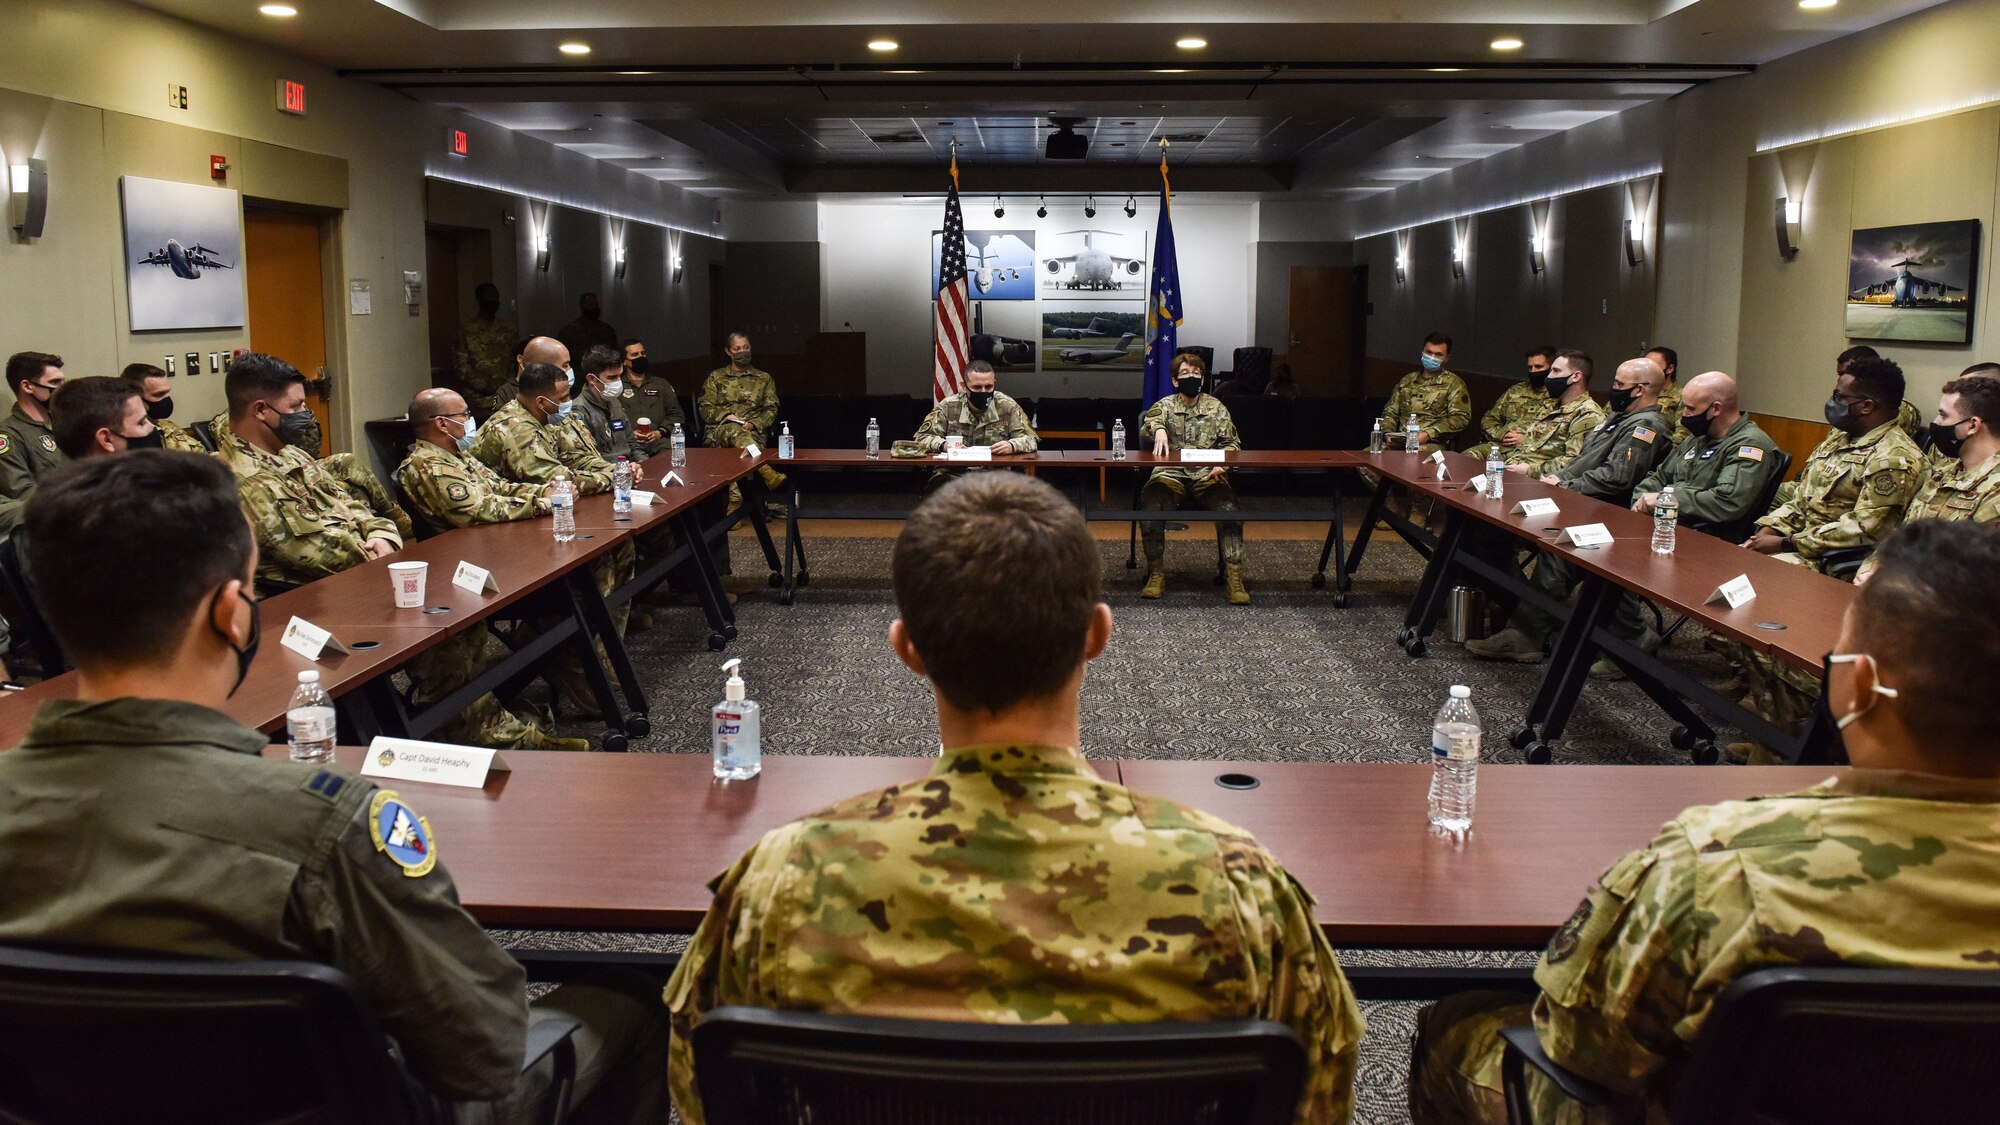 U.S. Air Force Gen. Jacqueline D. Van Ovost, Air Mobility Command commander, and Chief Master Sgt. Brian Kruzelnick, AMC command chief, discuss lessons learned with 305th Air Mobility Wing Airmen during a visit to Joint Base McGuire-Dix-Lakehurst, N.J., Sept. 8, 2021. 305th AMW crews were instrumental to the Operation Allies Refuge mission and were among the first to help evacuate. (U.S. Air Force Photo by Staff Sergeant Shay Stuart)